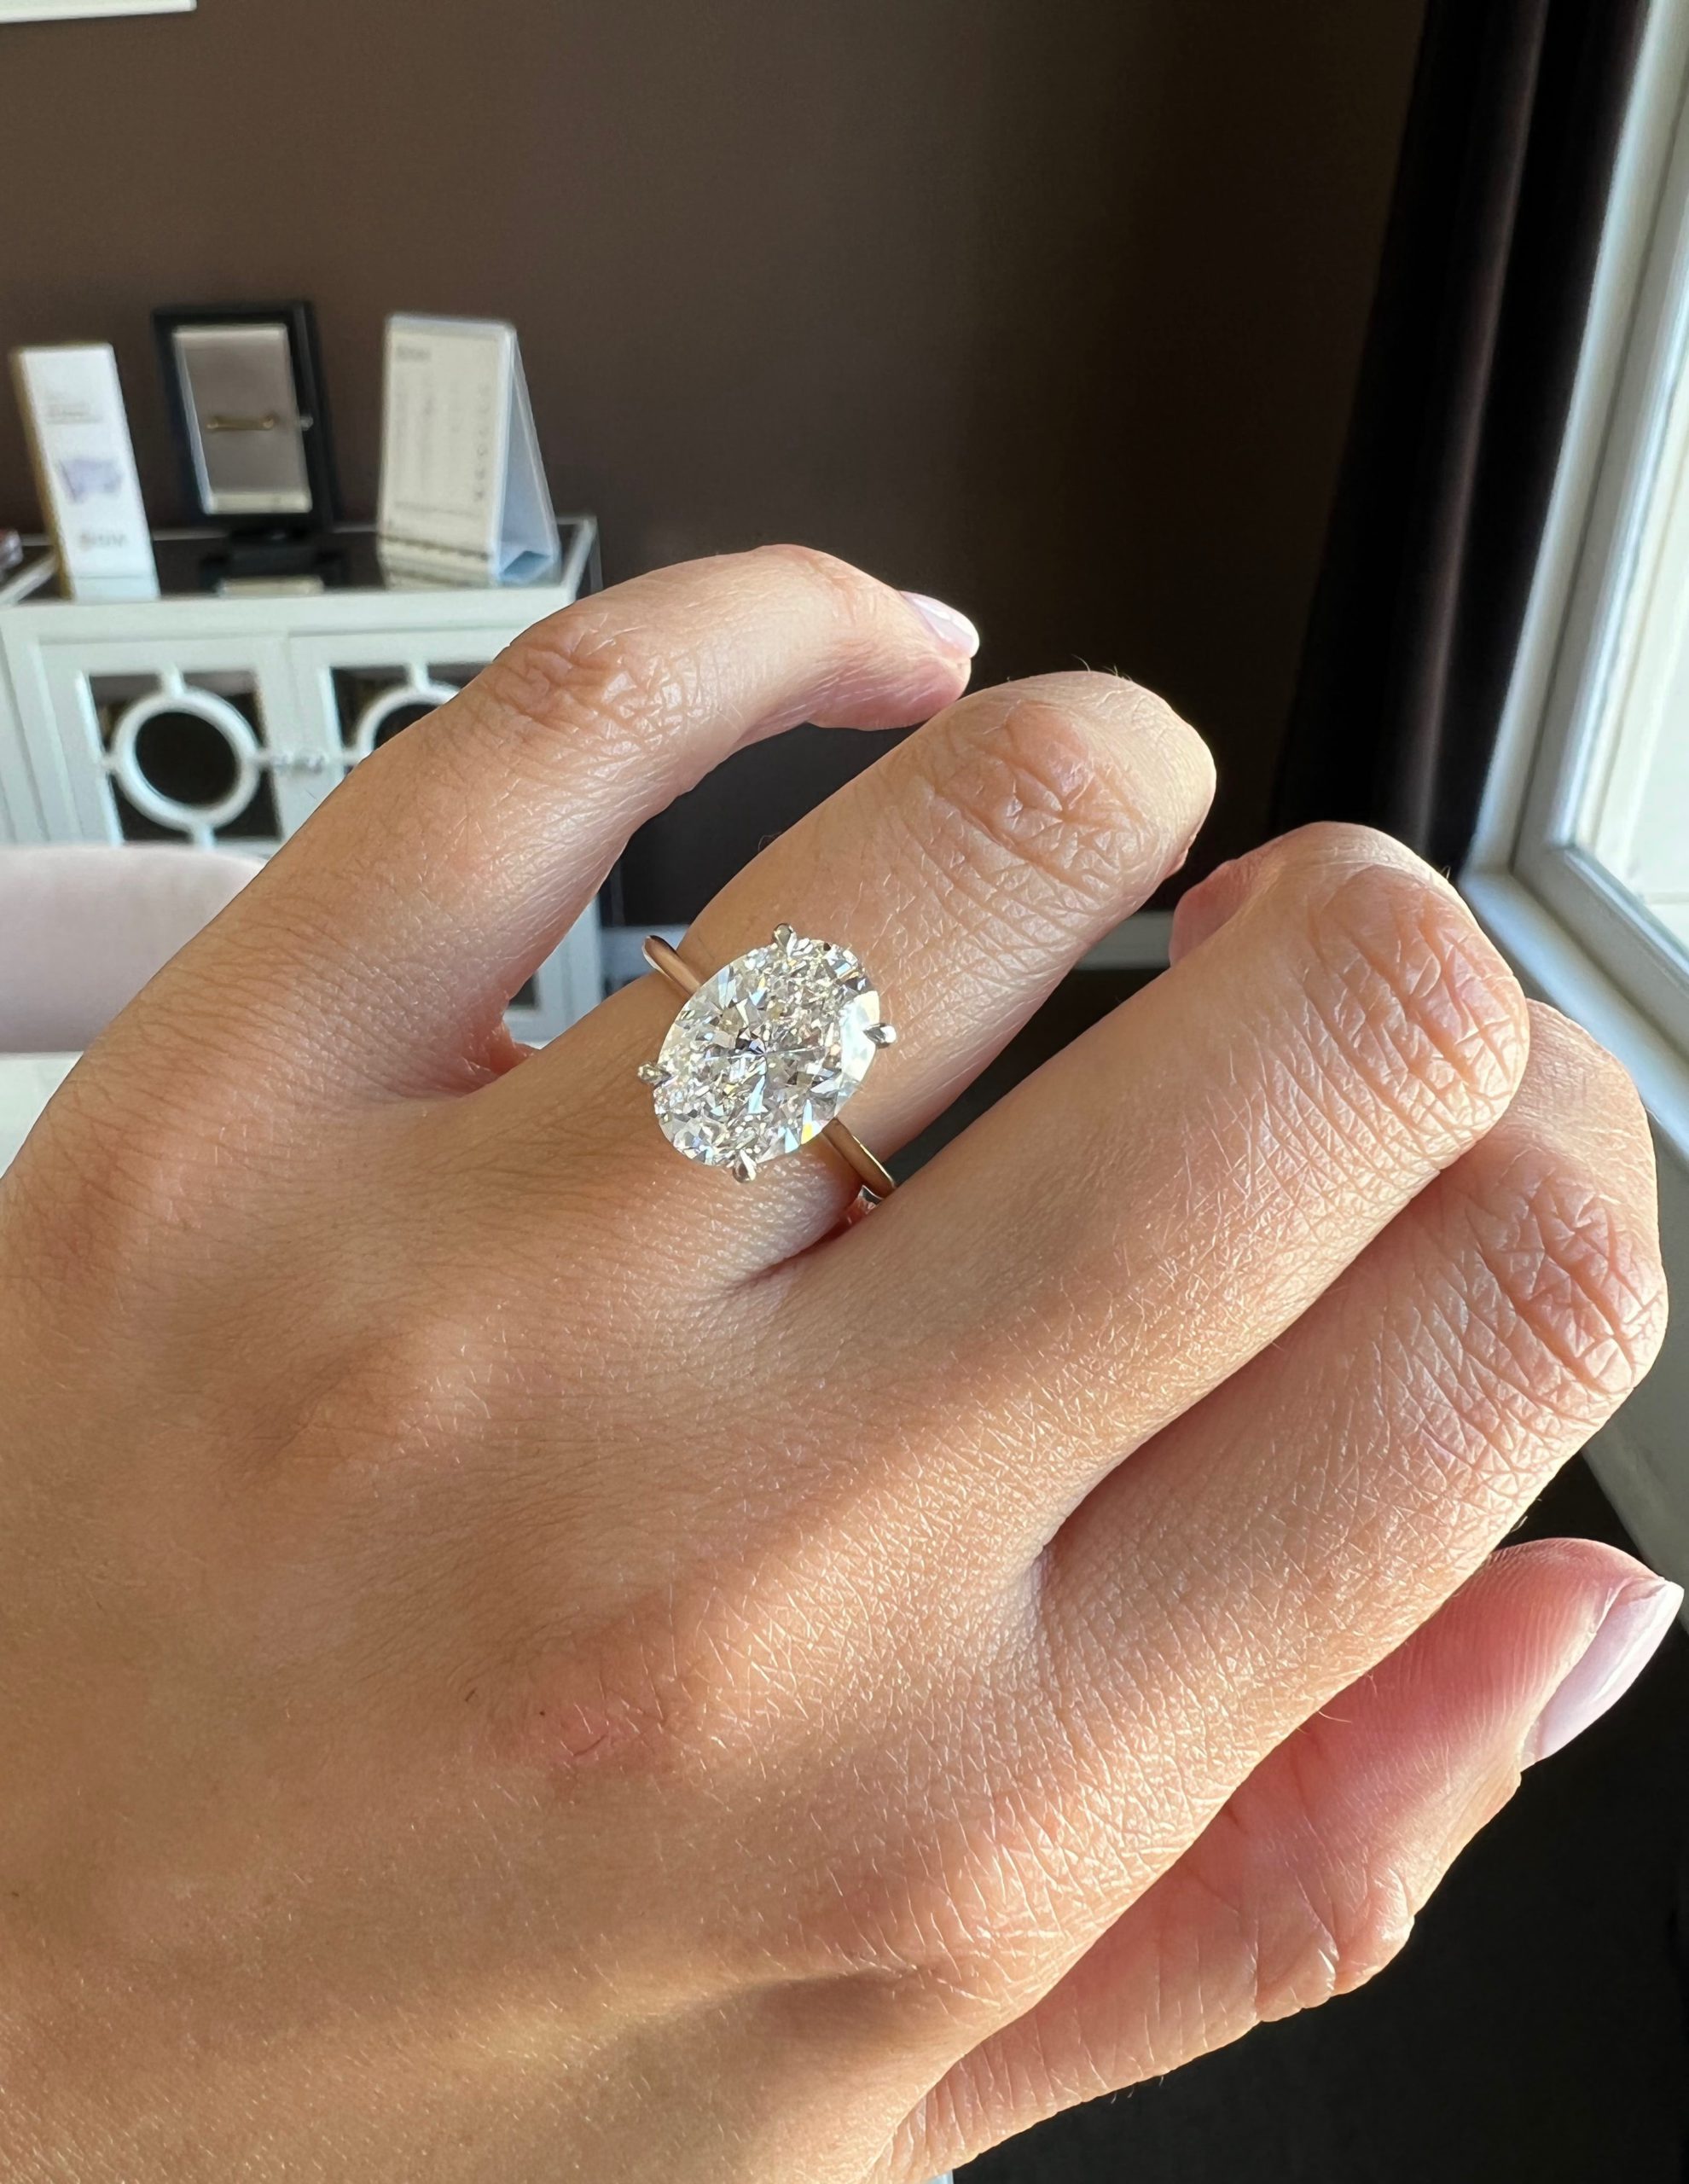 Engagement Ring Shopping is the Best (And Worst) » Wolf & Stag